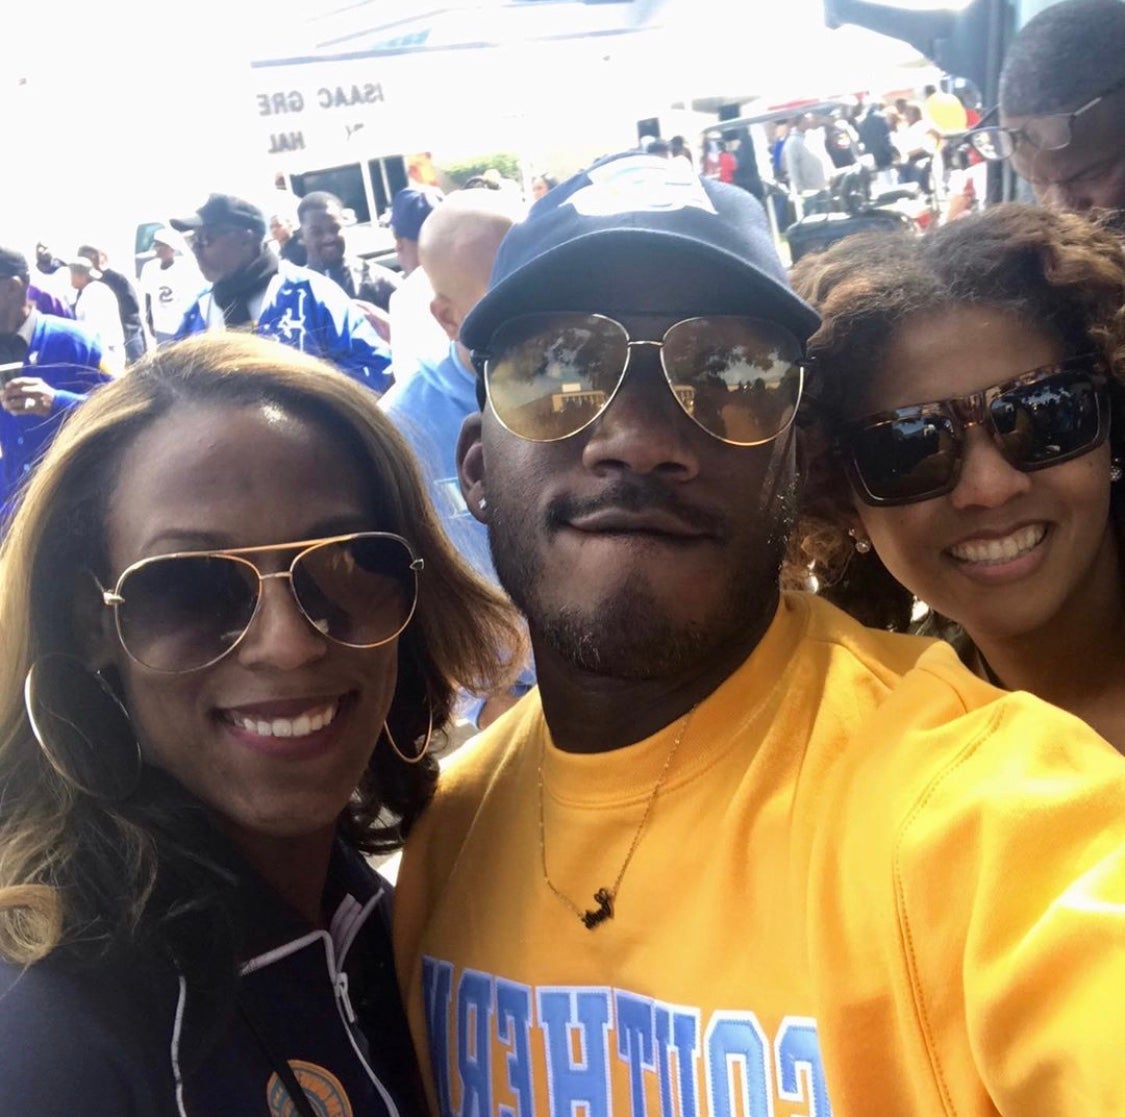 22 Moments From Southern University Homecoming That Were Pure Vibes